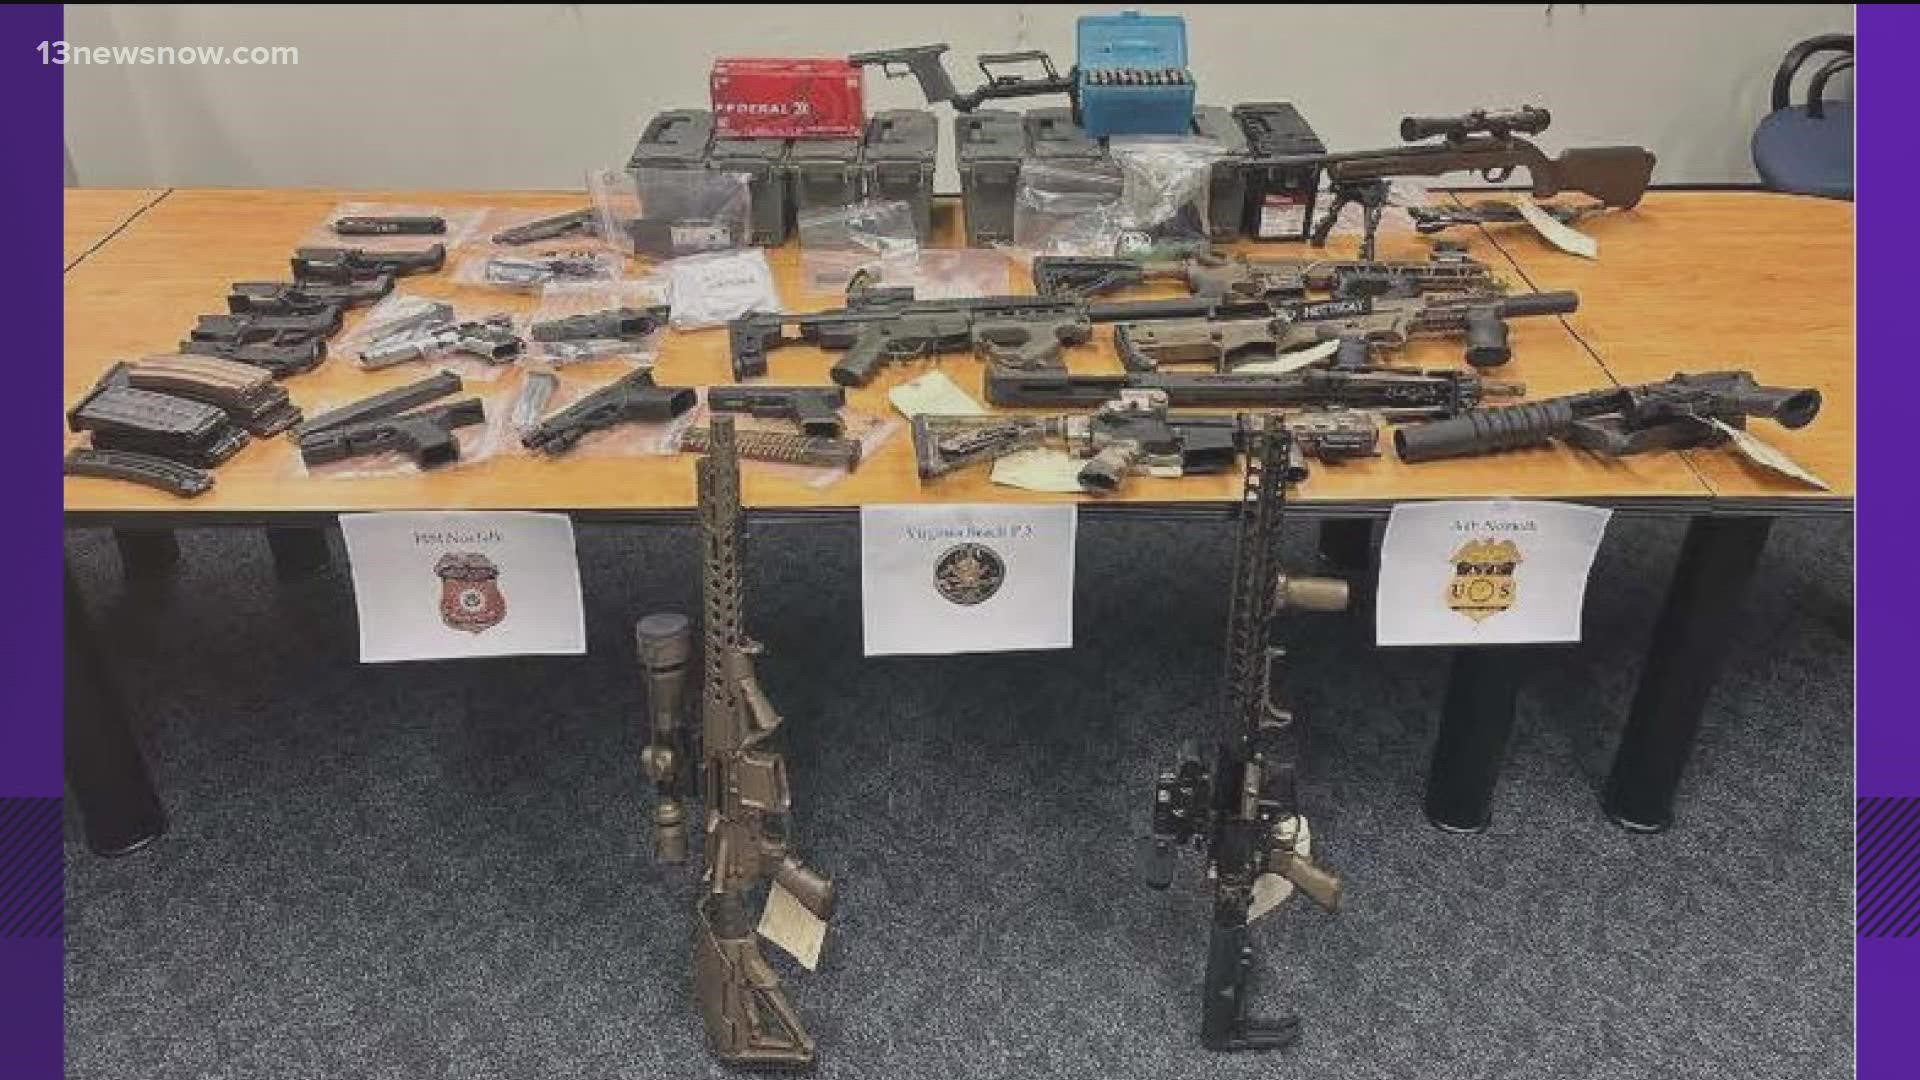 Police, ATF, and Homeland Security investigators searched John Dane's home Tuesday after they got a tip about someone illegally making and selling automatic firearms